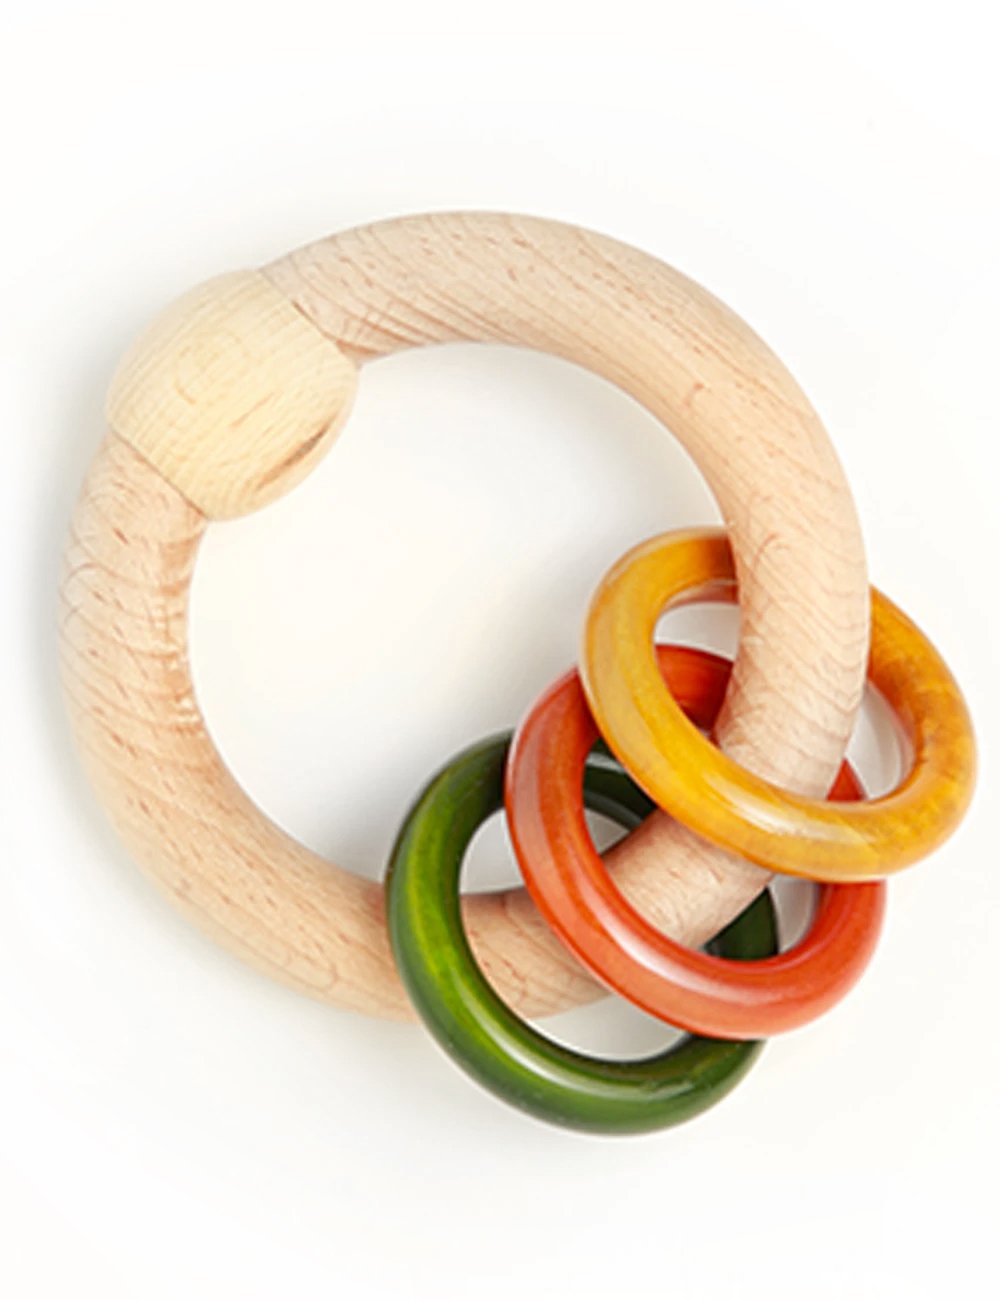 Wooden Rattle - Circular Colored